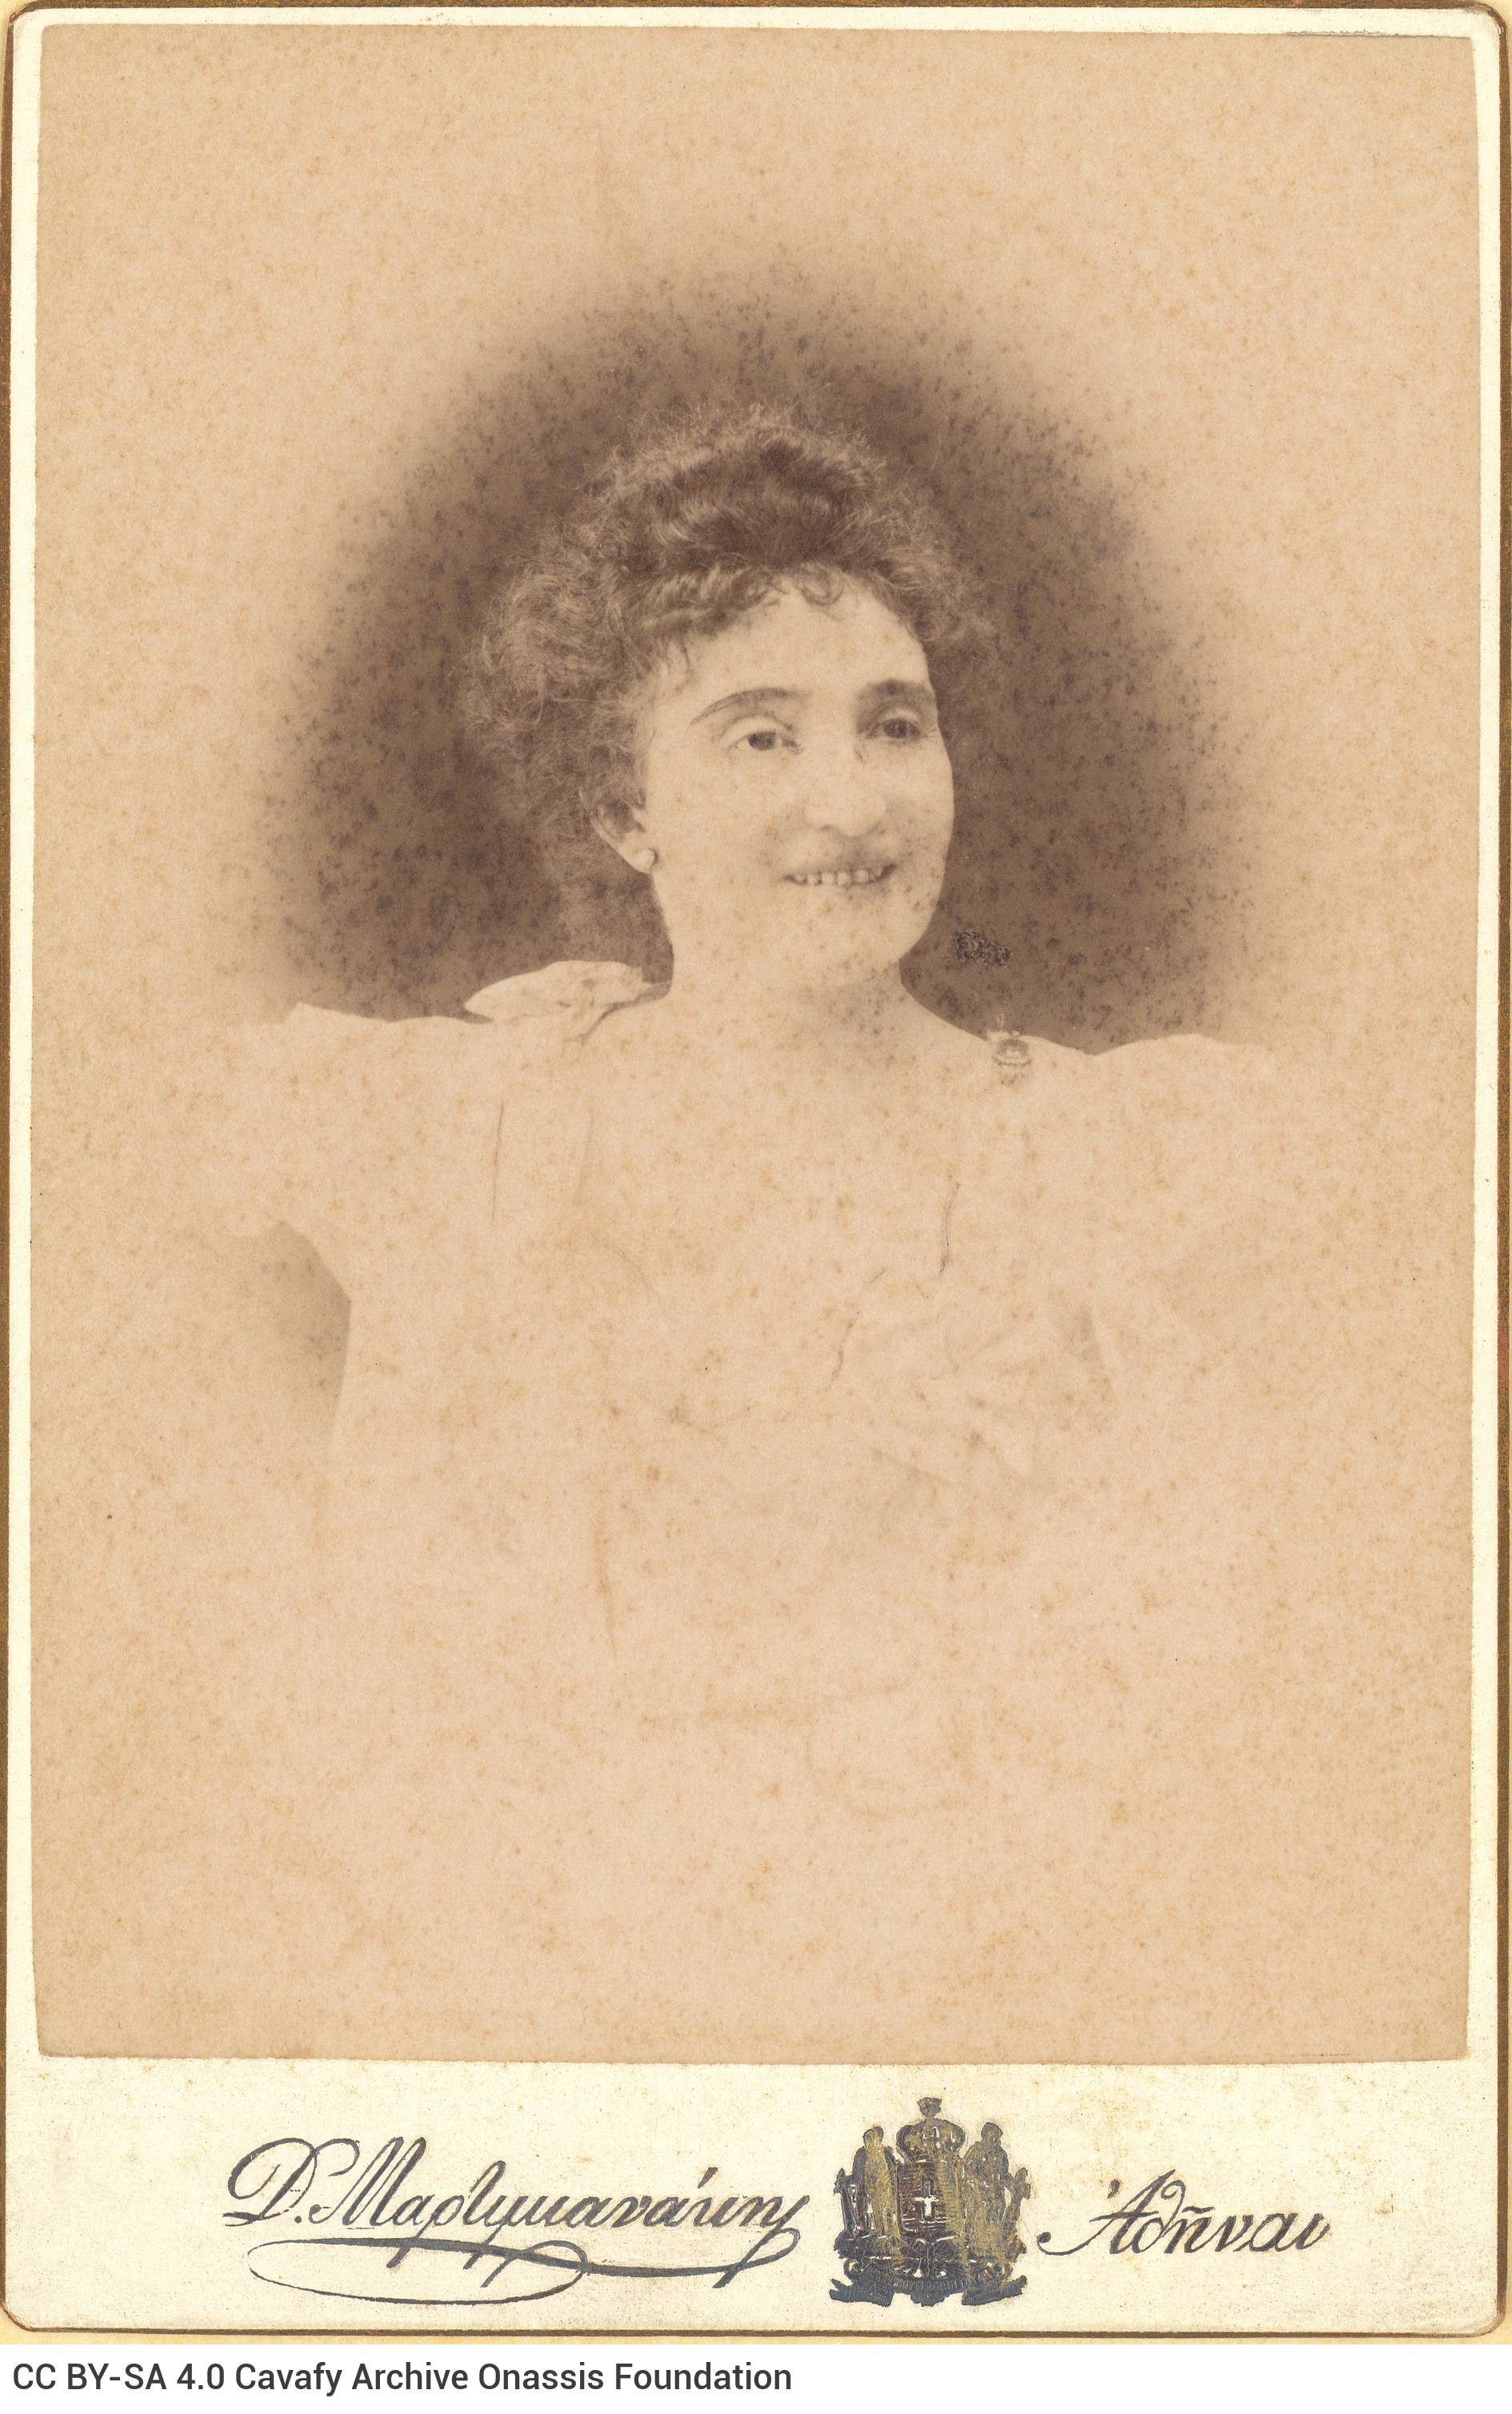 Photographic portrait of the poet's aunt, Amalia Callinus, née Fotiadi. The logo of the photo shop in the lower part of the 